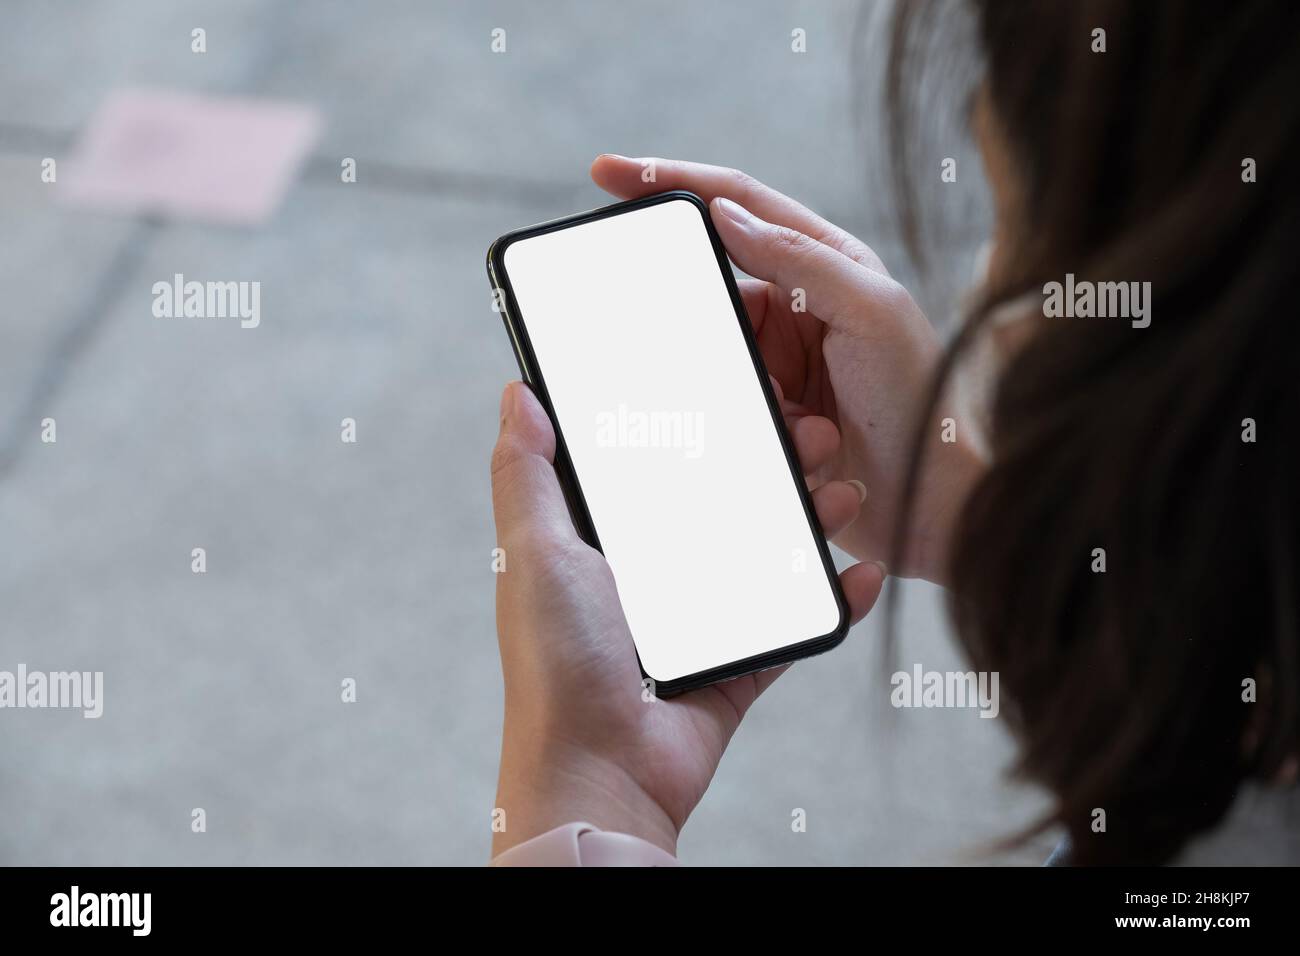 Top view woman holding blank screen mock up mobile phone, close up shot Stock Photo